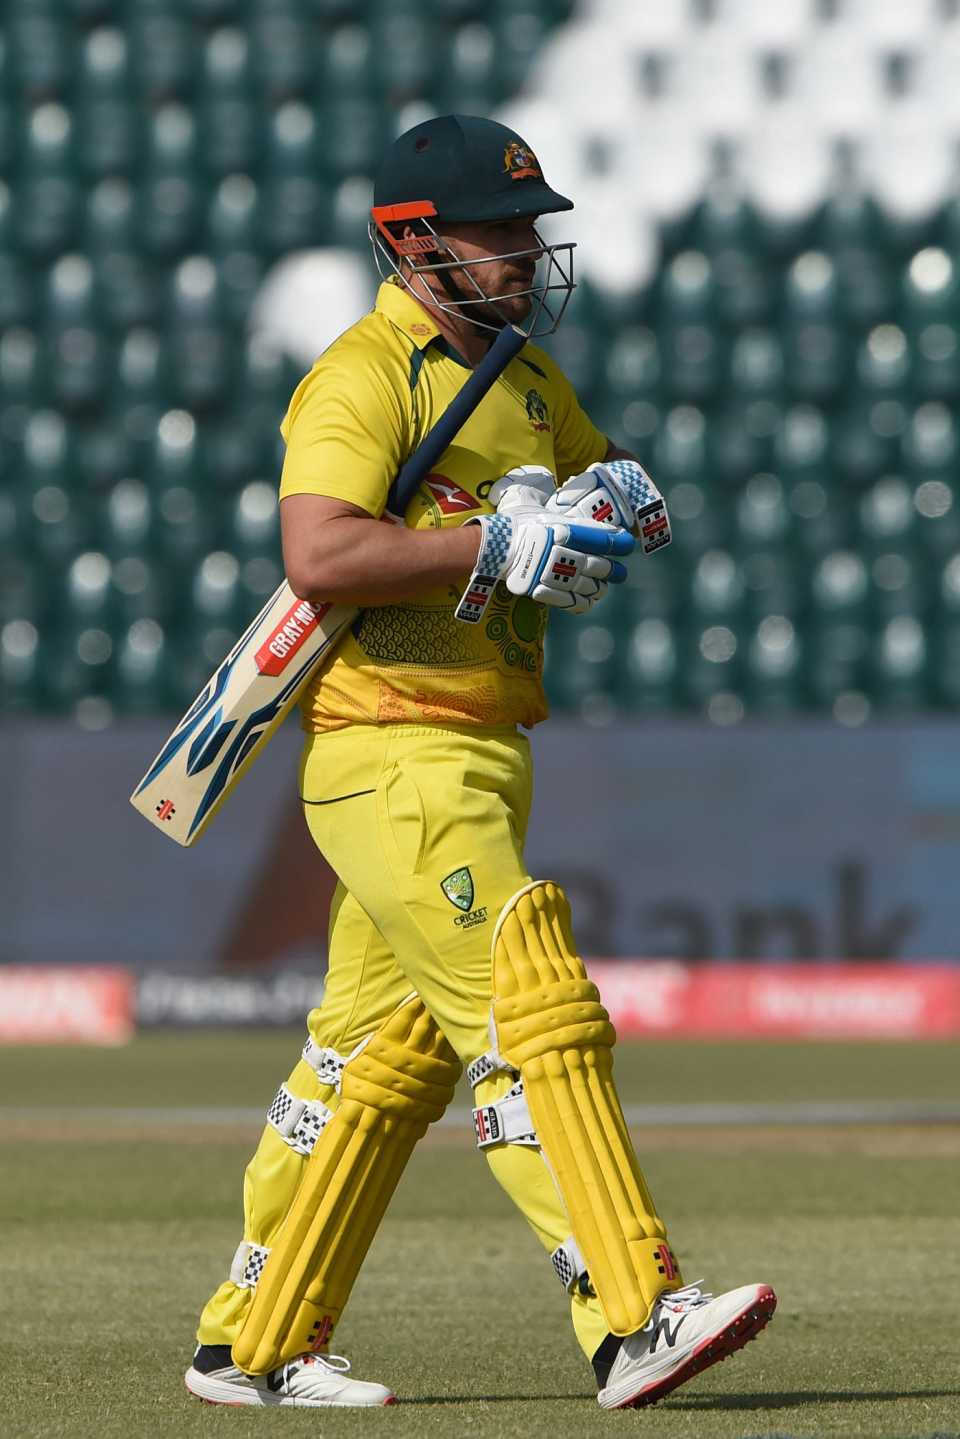 Aaron Finch was out for his second successive duck in ODIs